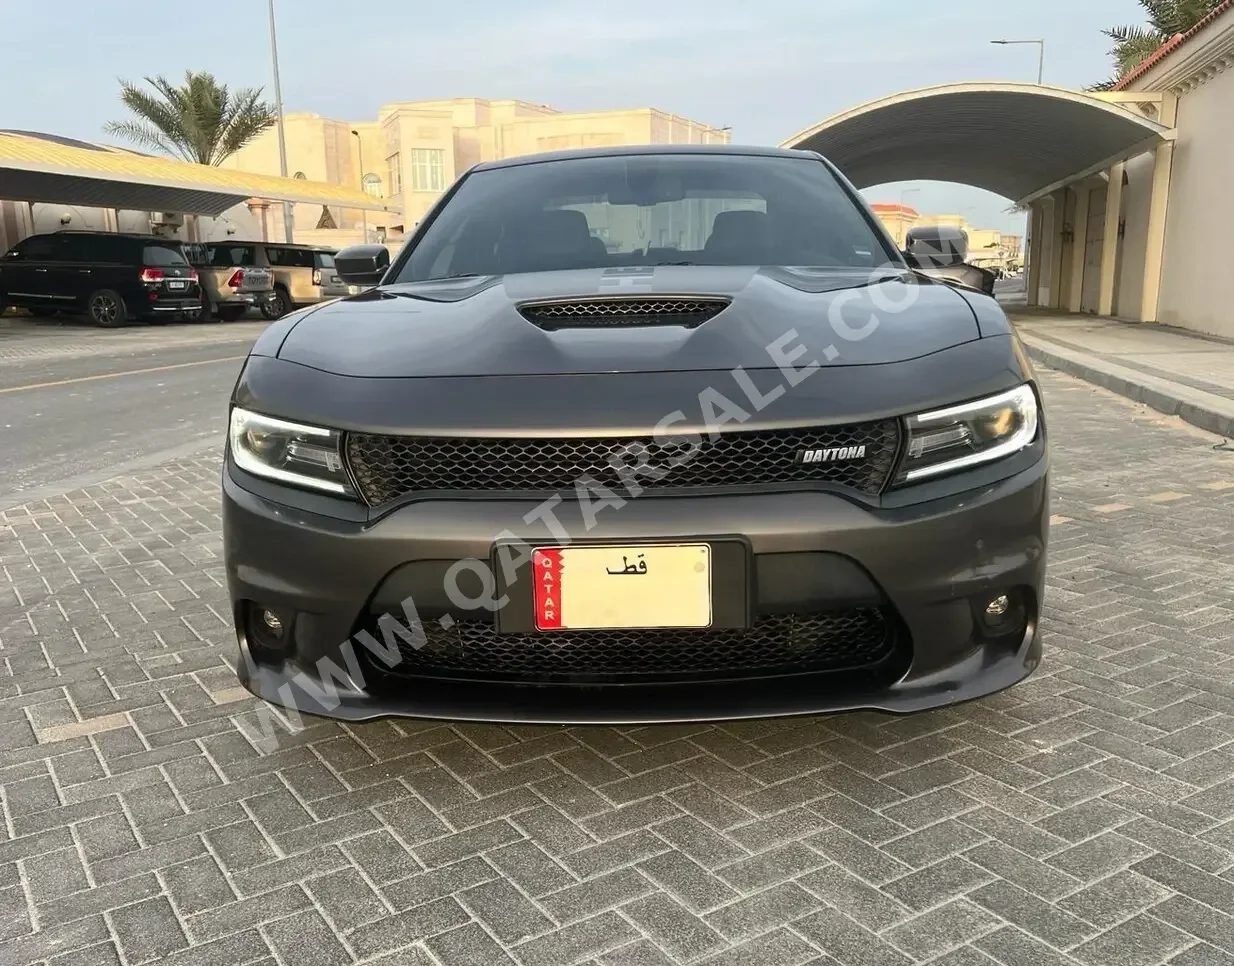 Dodge  Charger  RT  2019  Automatic  61,000 Km  8 Cylinder  Rear Wheel Drive (RWD)  Sedan  Gray  With Warranty